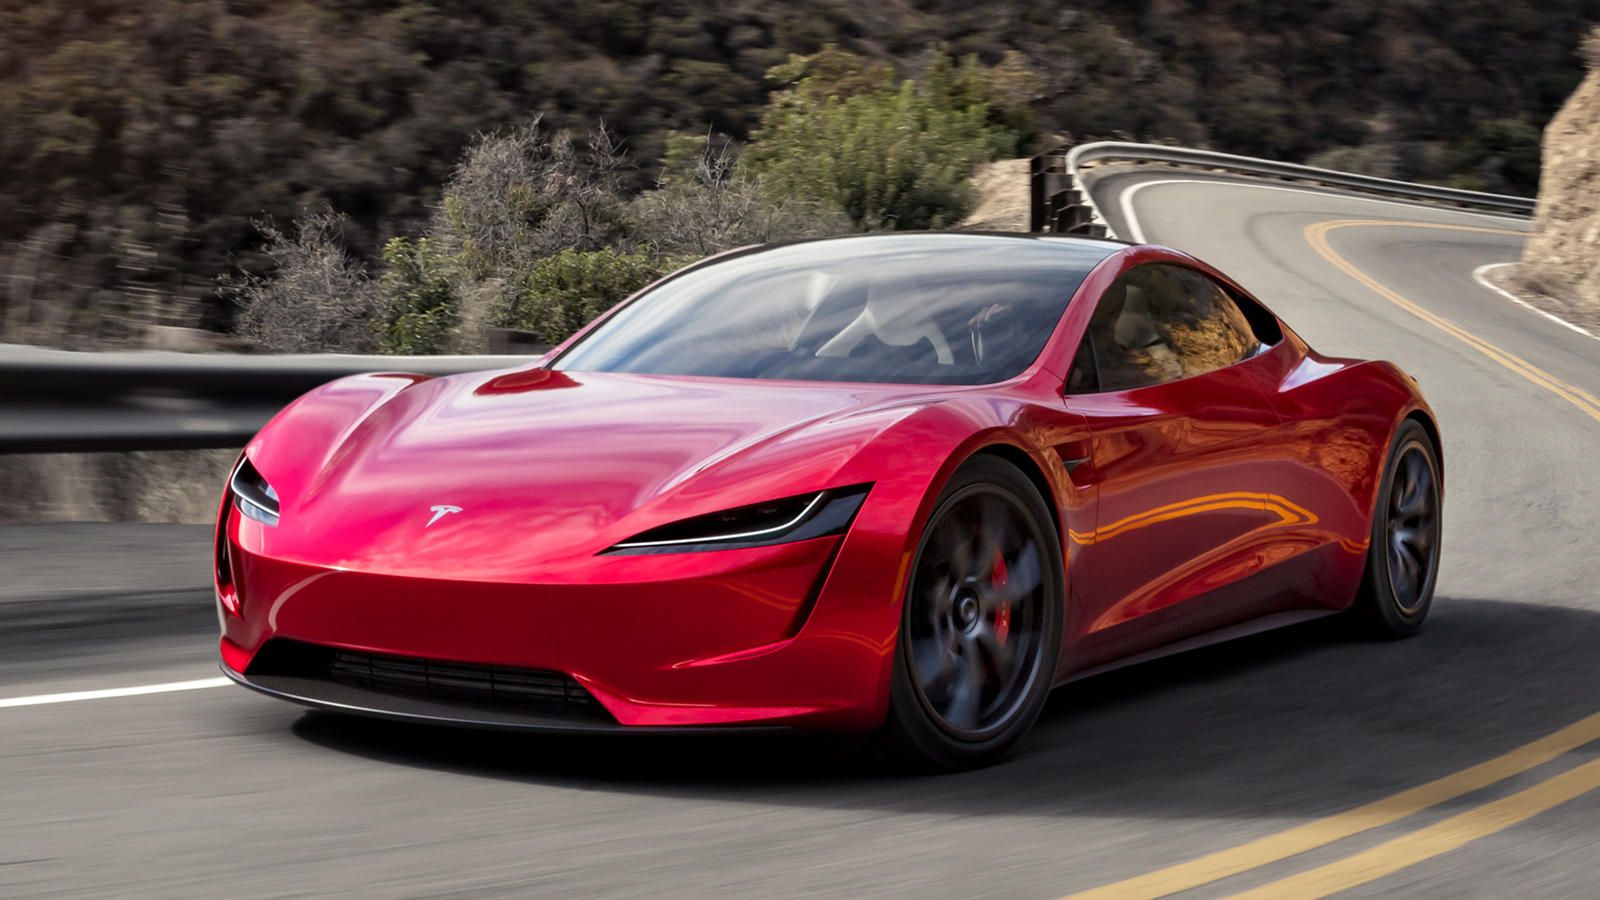 Here's What Makes The Tesla Roadster The Best EV For Drag Racing